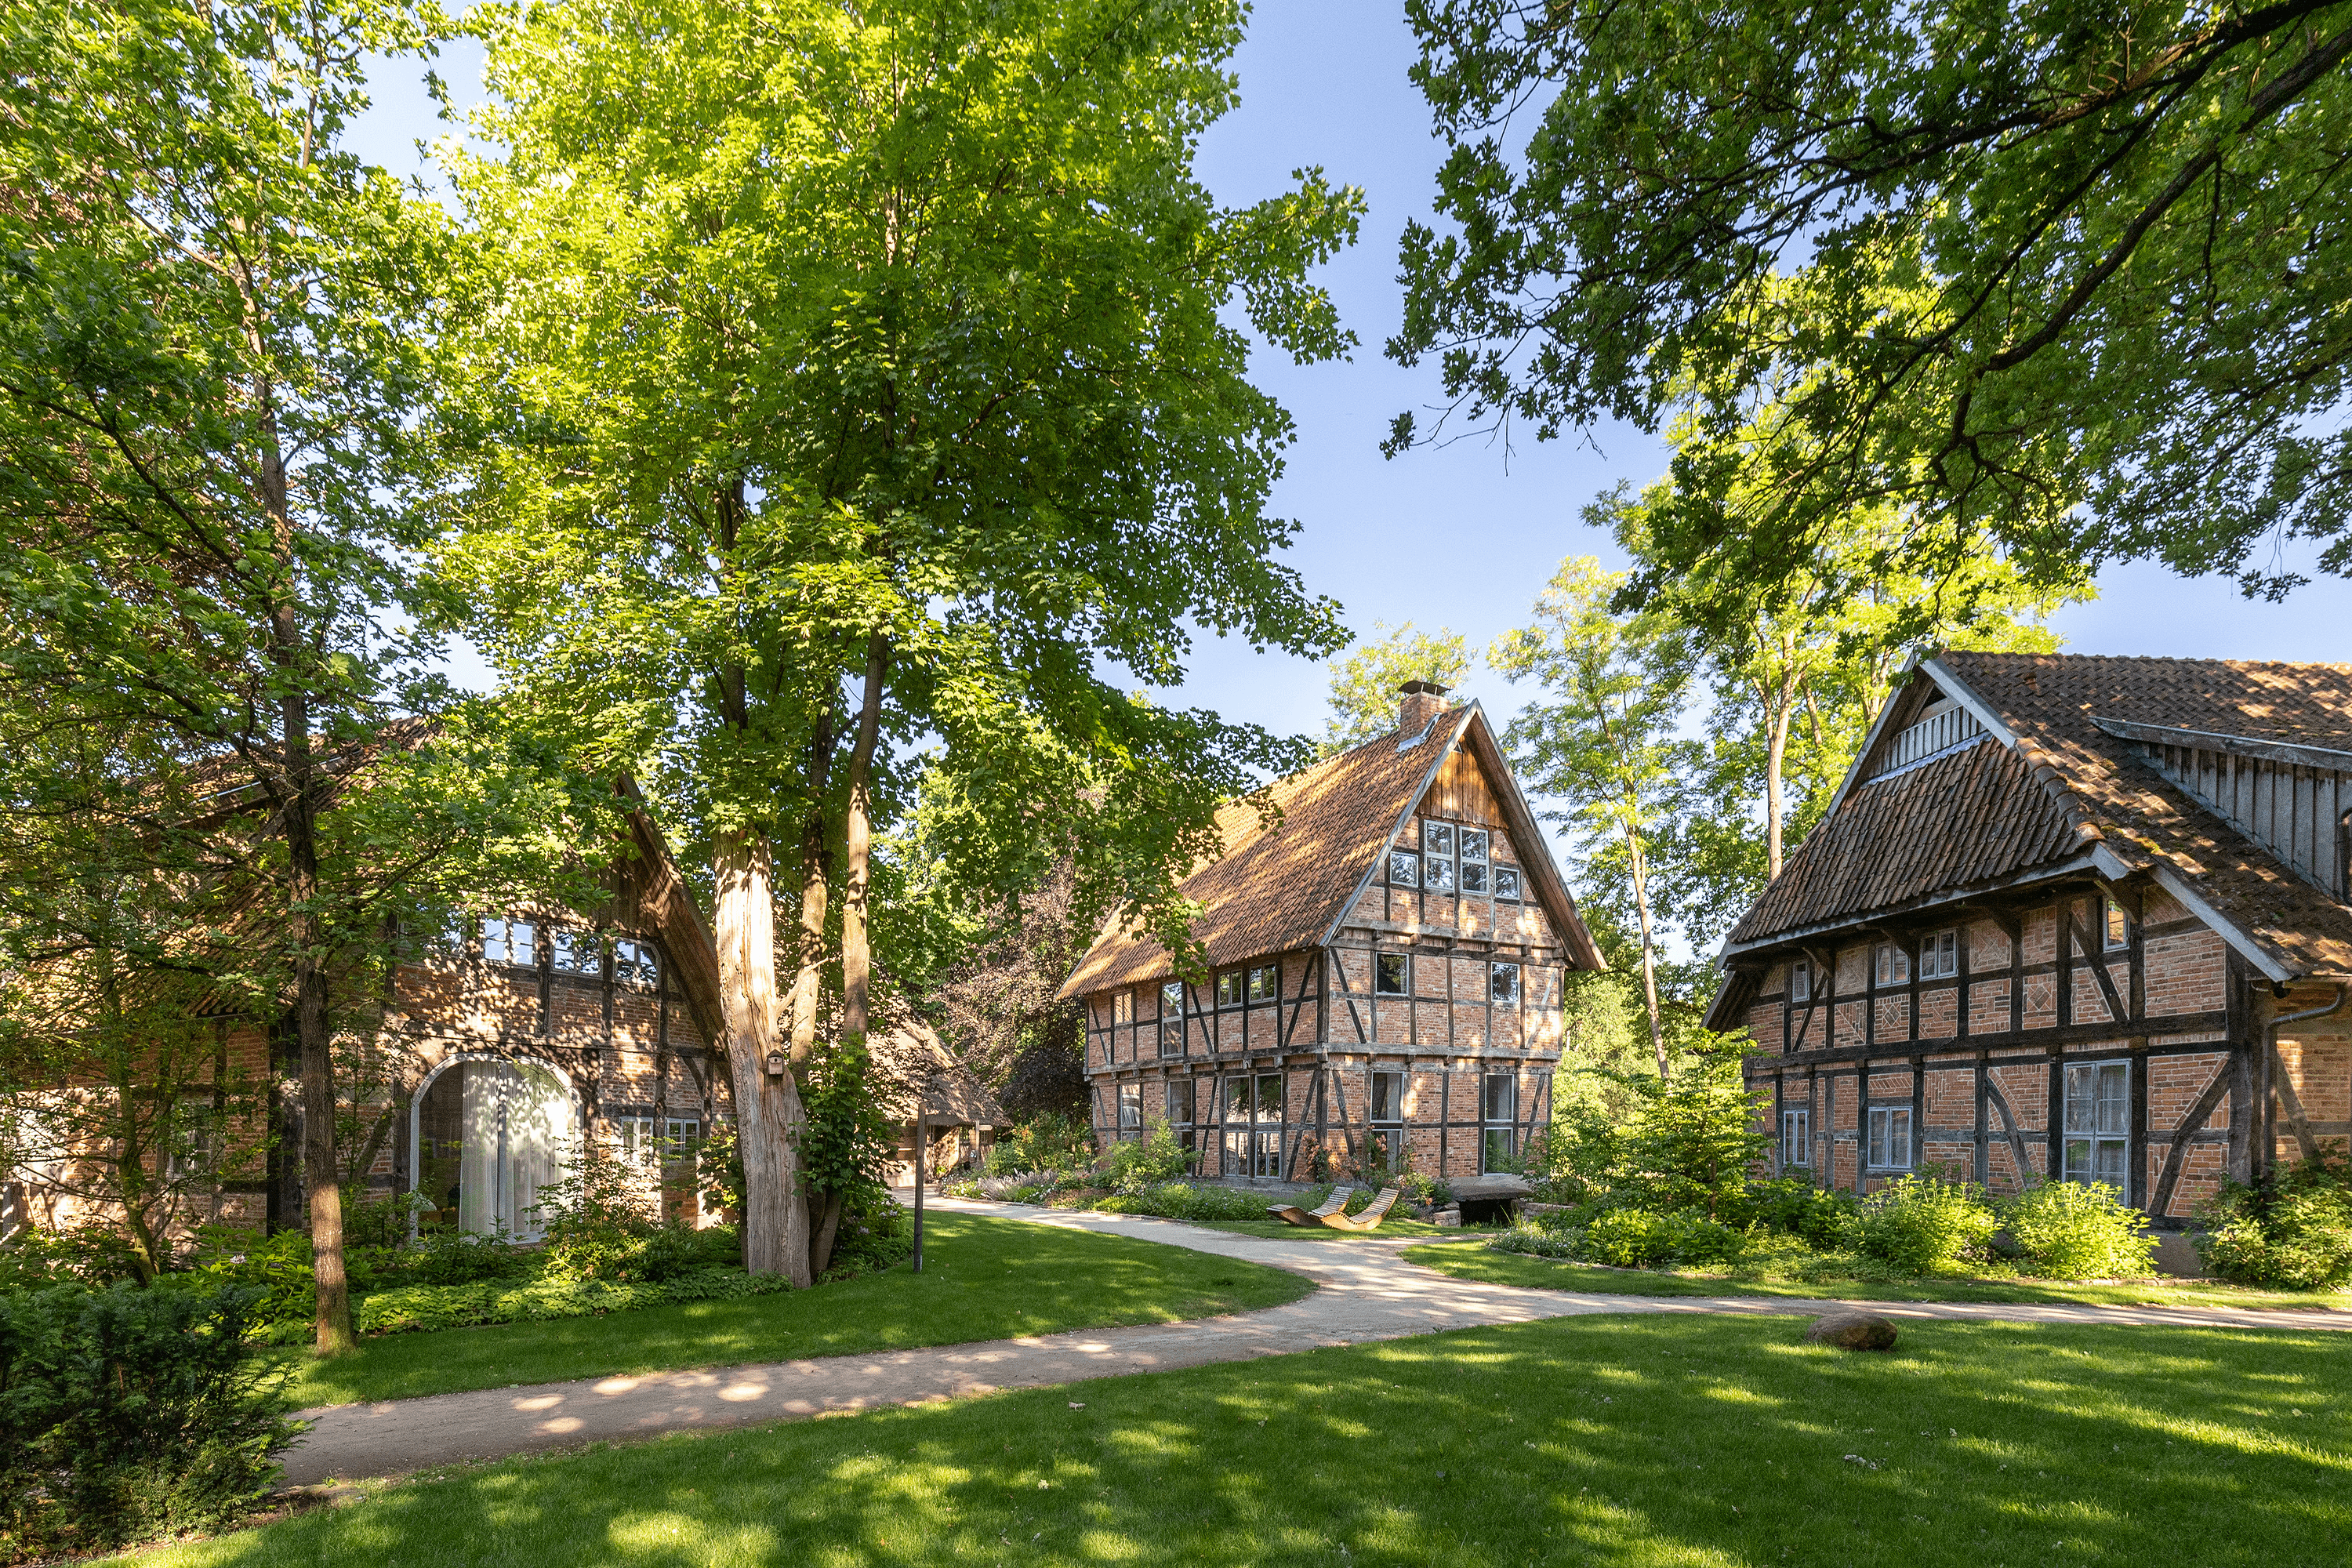 For a romantic weekend - our half-timbered hotels